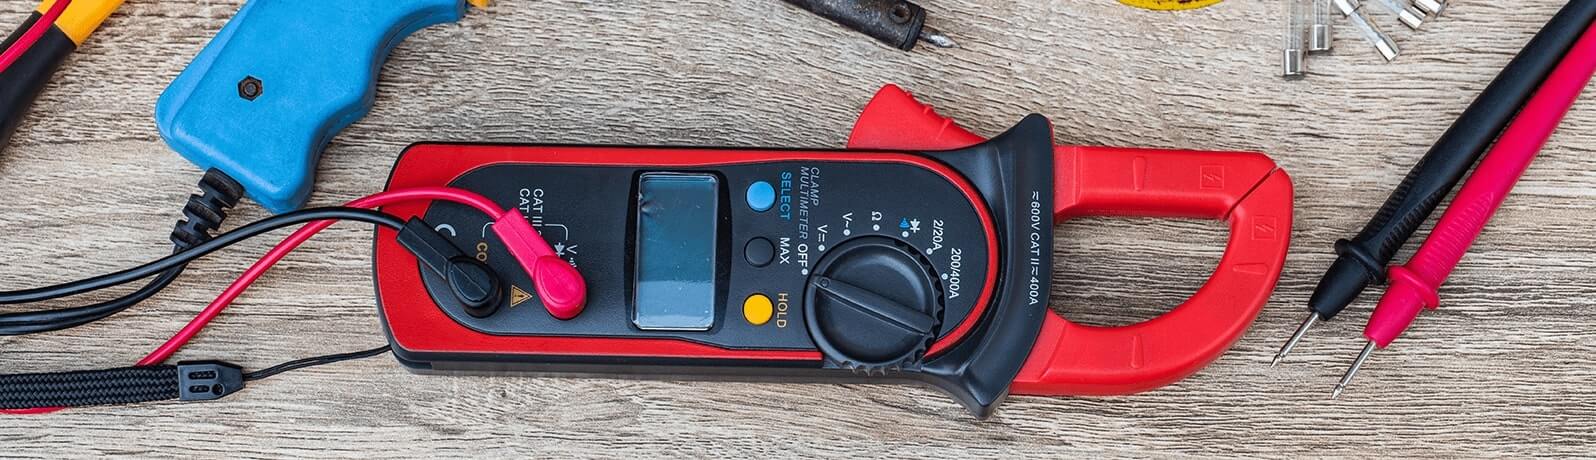 how to use a clamp meter